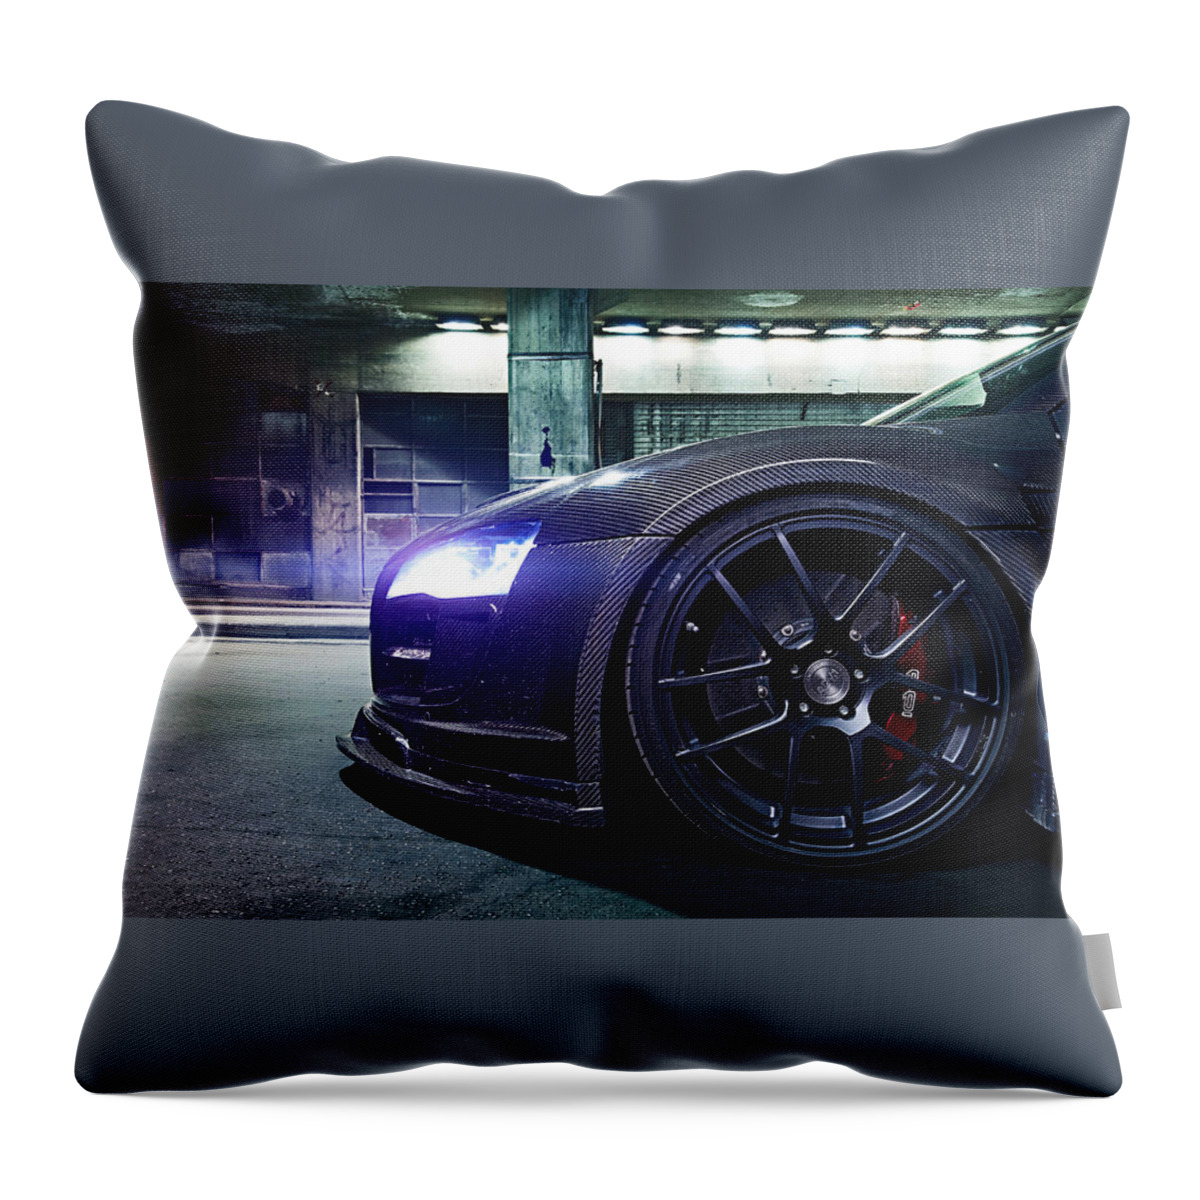 Audi R8 Throw Pillow featuring the photograph Audi R8 by Jackie Russo